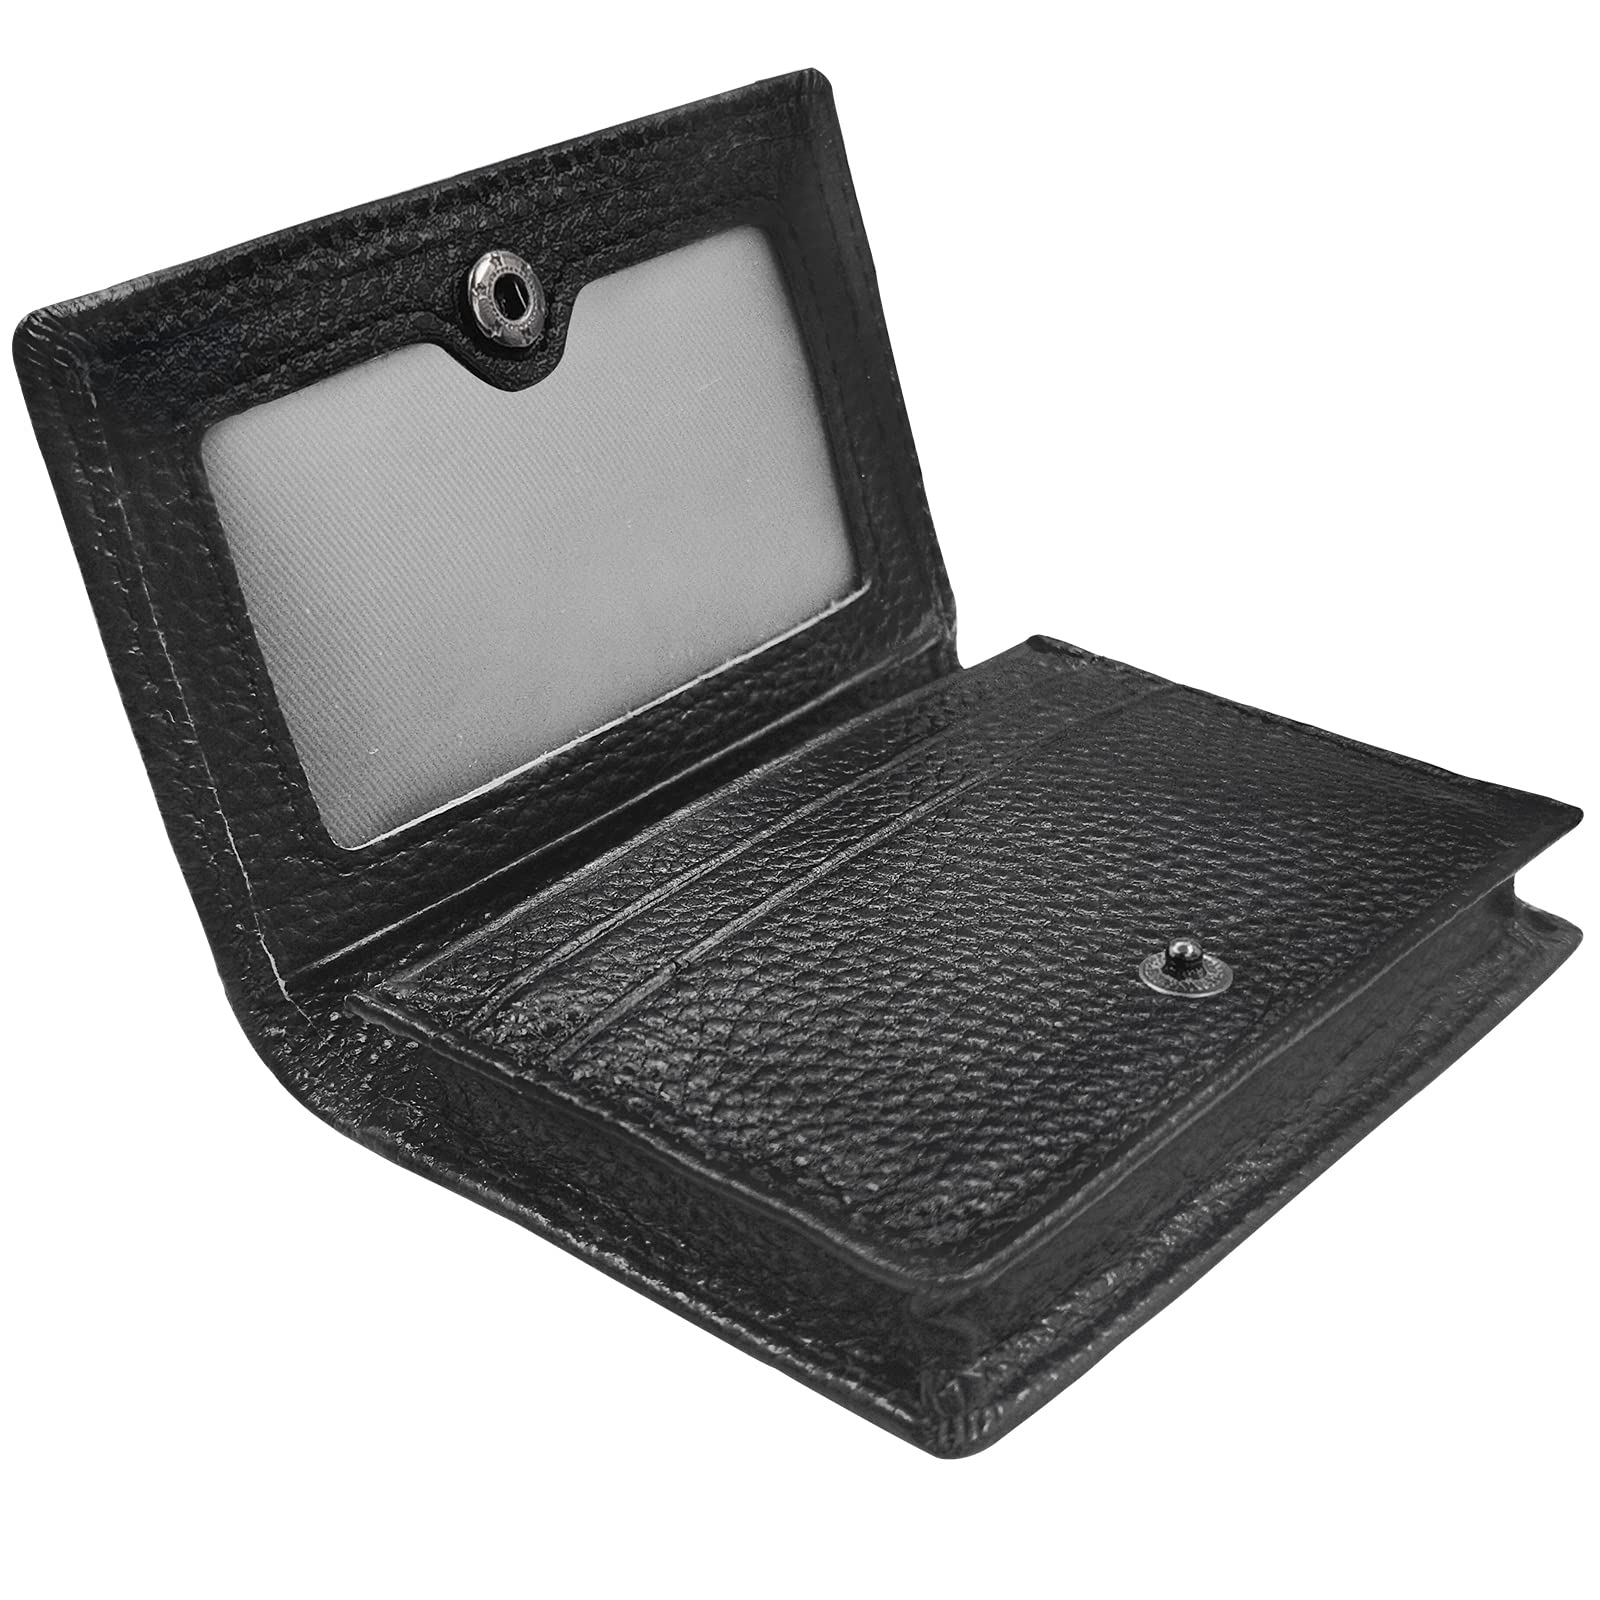 Outrip genuine Leather Business card Holder Name card case credit card Wallet with ID Window RFID Blocking (Black2)